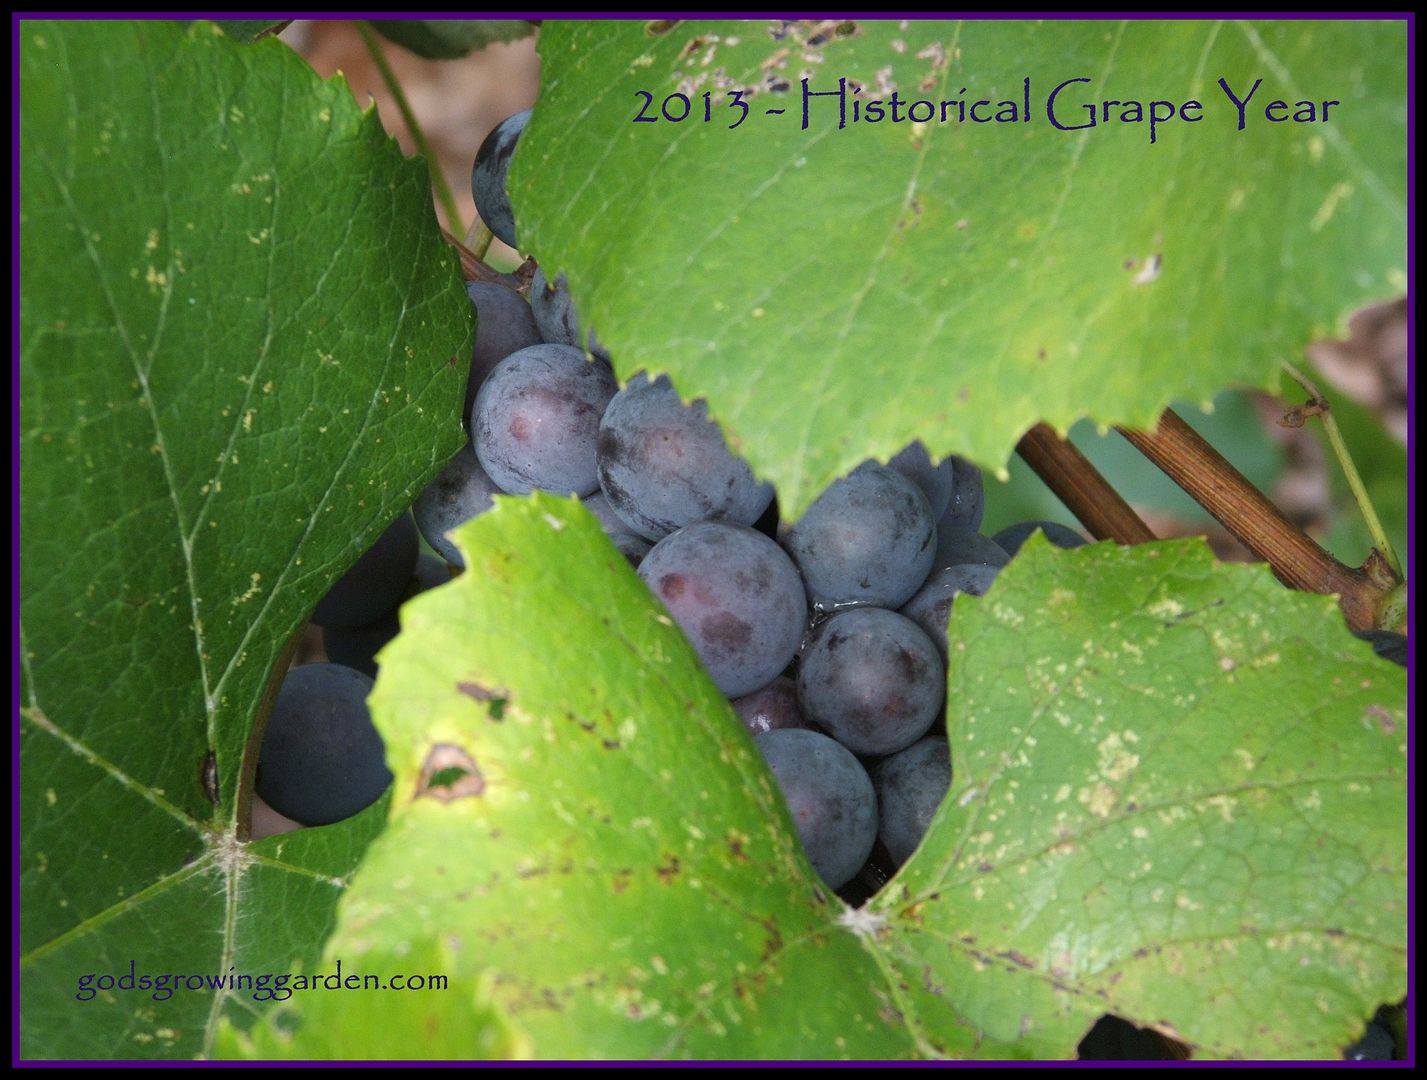 Grape Year by Angie Ouellette-Tower for godsgrowinggarden.com/ photo 010_zpsee8aadfb.jpg